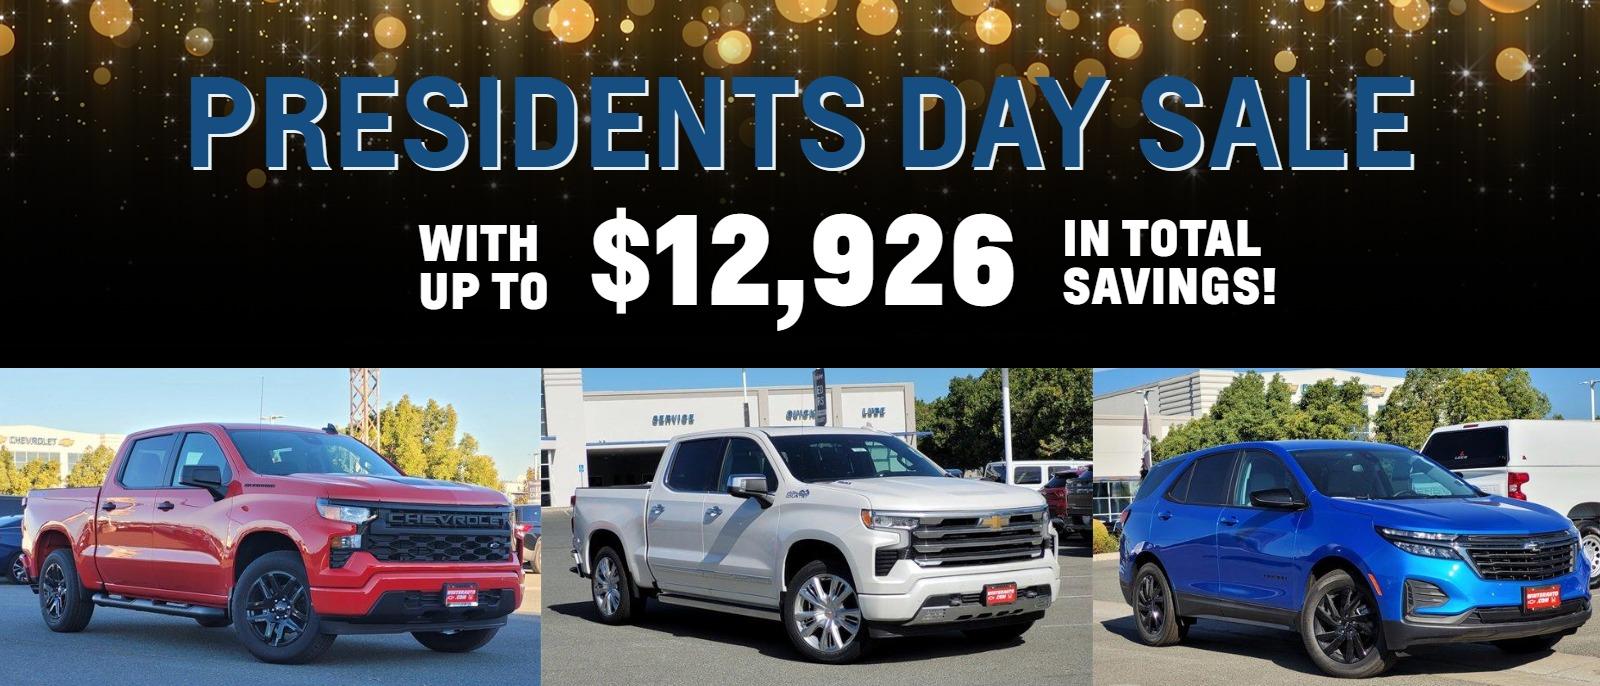 Presidents Days Sale WITH UP TO $12,926 IN TOTAL SAVINGS!